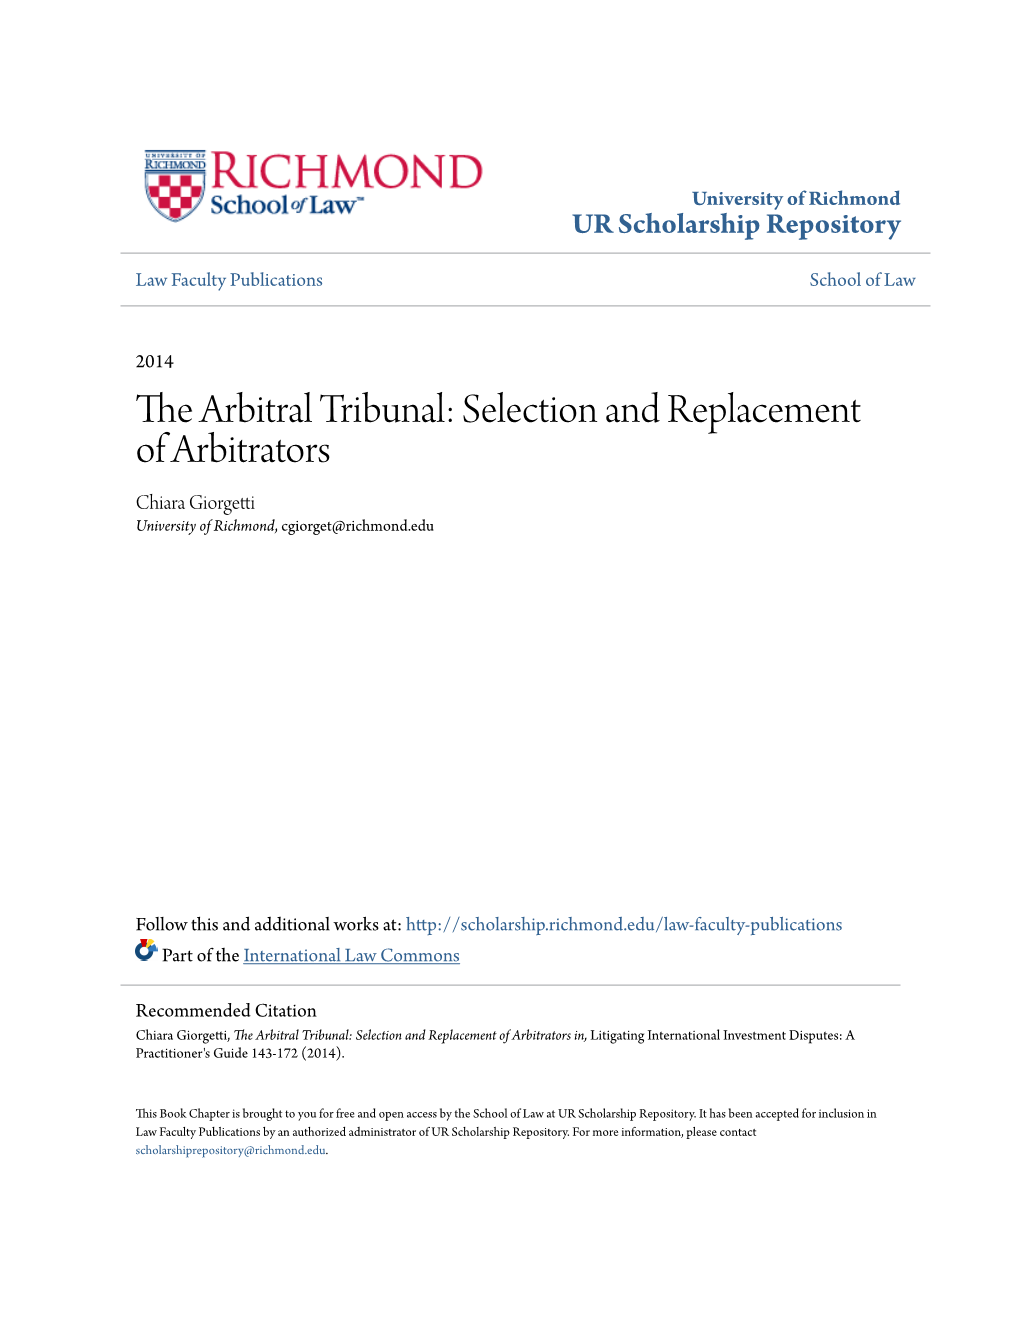 The Arbitral Tribunal: Selection and Replacement of Arbitrators Chiara Giorgetti University of Richmond, Cgiorget@Richmond.Edu